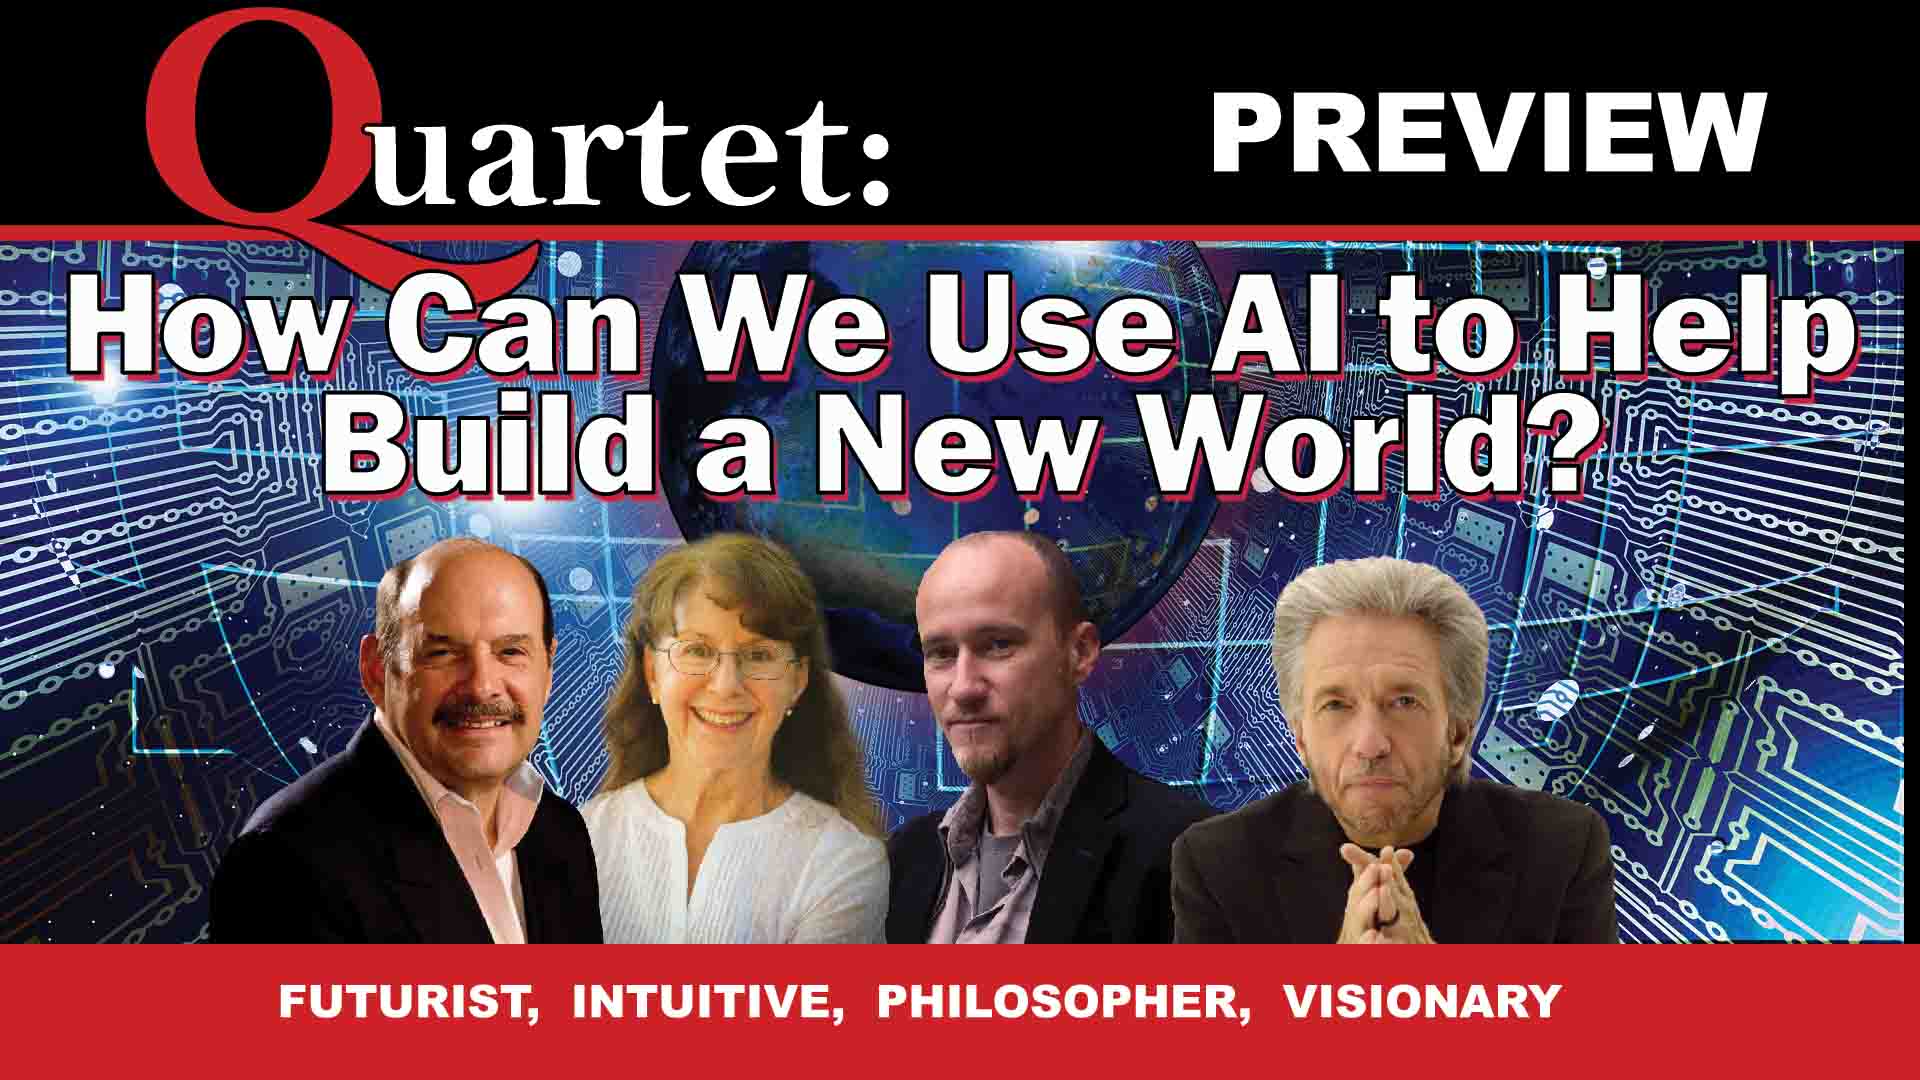 Quartet Preview - How can we use AI to help build a new world?